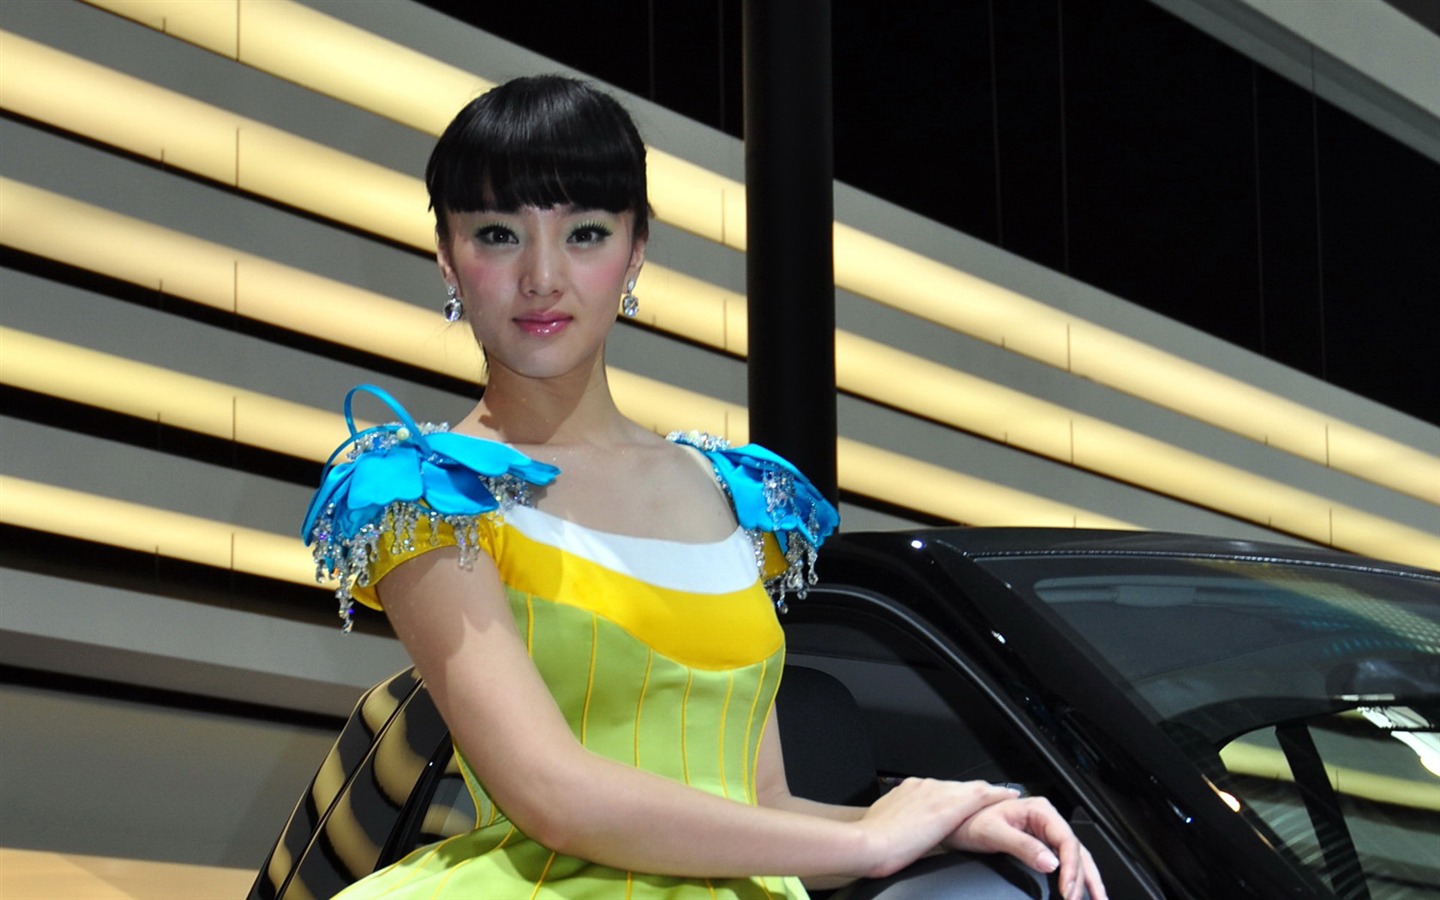 2010 Beijing Auto Show car models Collection (2) #3 - 1440x900